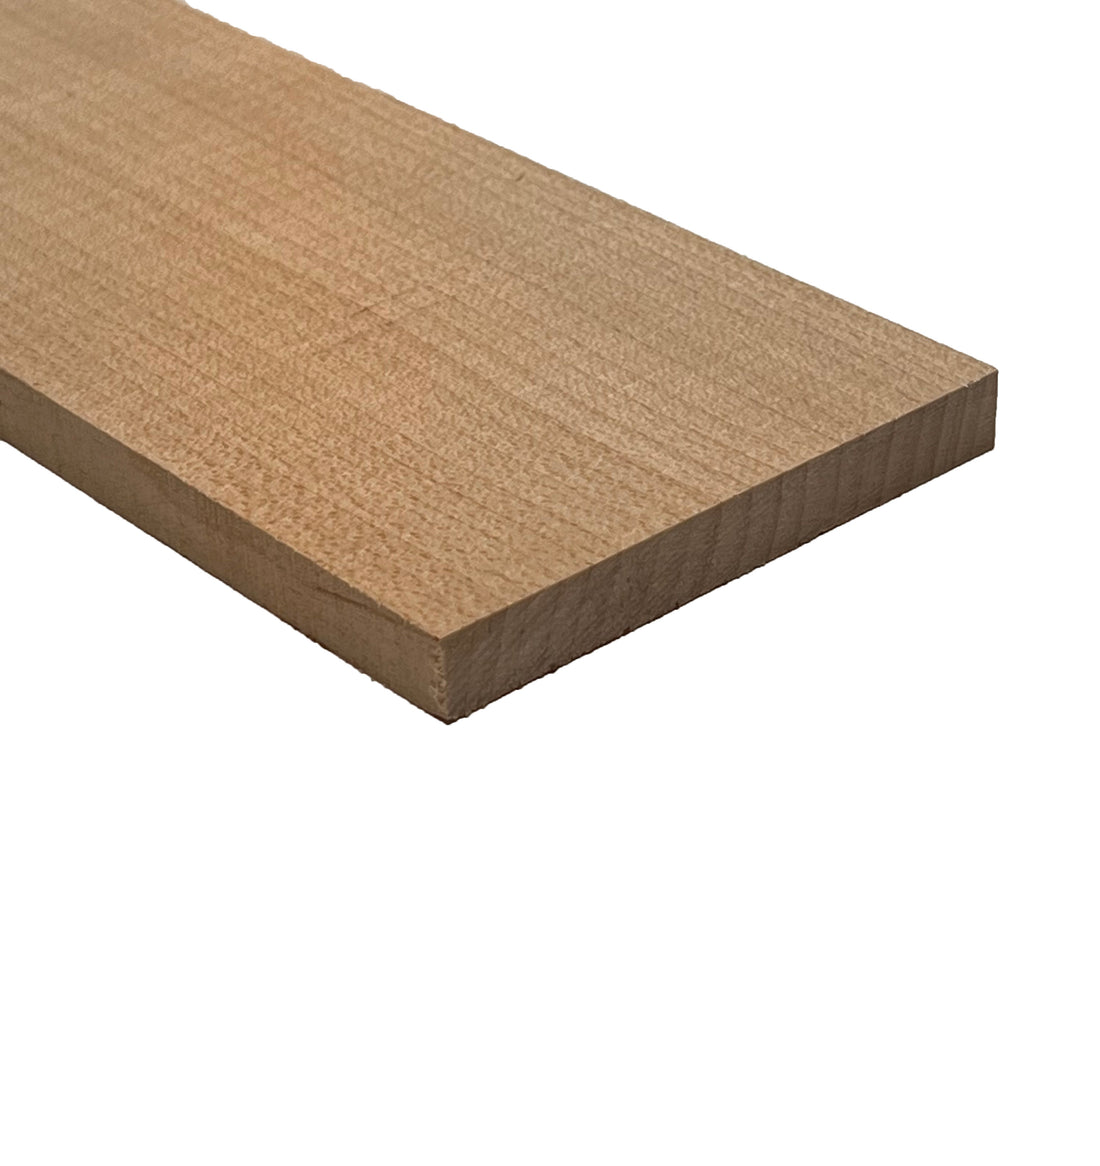 Hard Maple Thin Stock Lumber Boards Wood Crafts - Exotic Wood Zone - Buy online Across USA 